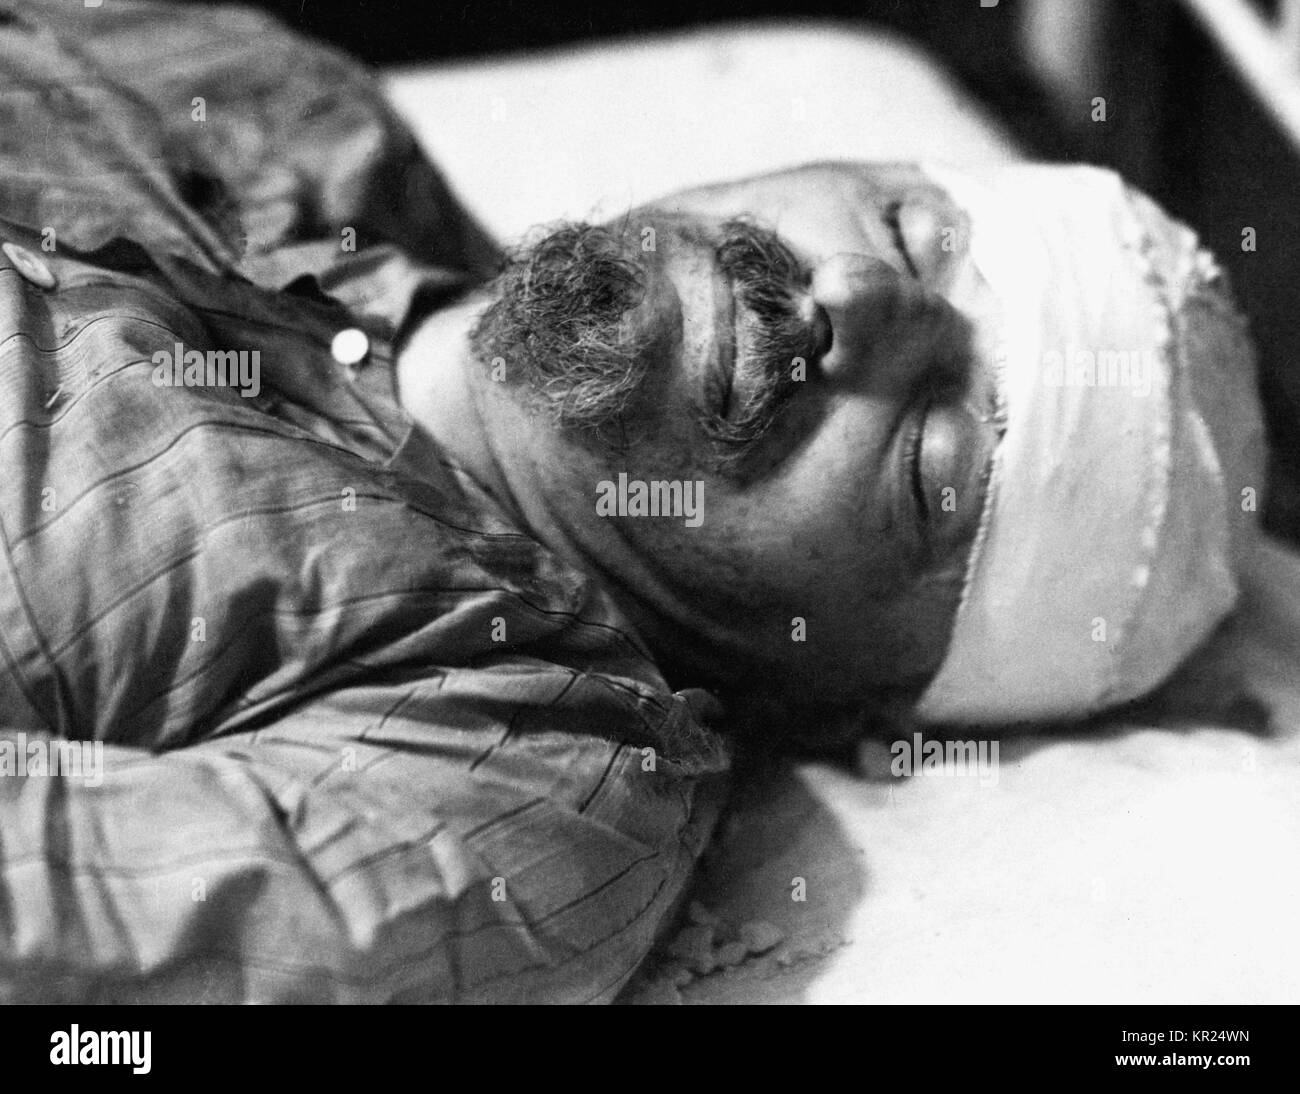 LEON TROTSKY (1879-1940) Soviet Marxism revolutionary after his  and death on 21 August 1940, aged 60, following the attack by Ramon Mercader. Stock Photo